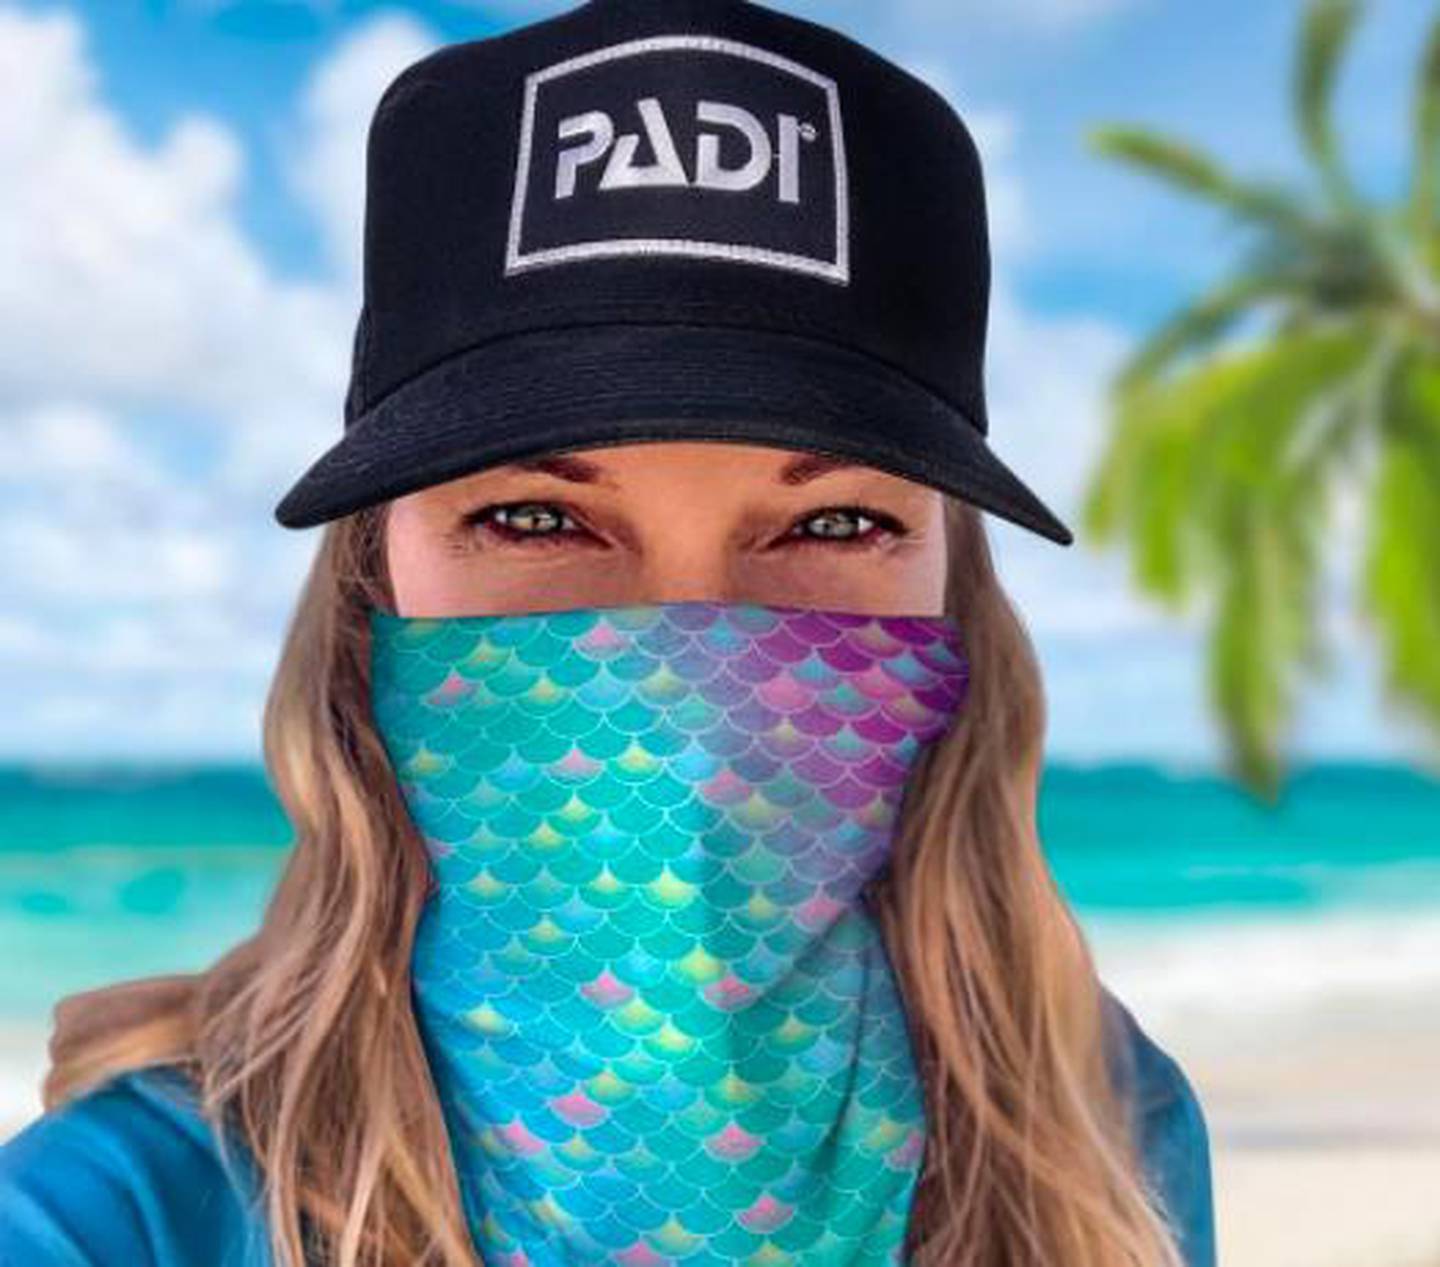 These face guards offer protection against virus transmission and the sun, and help the ocean at the same time. Courtesy Padi 